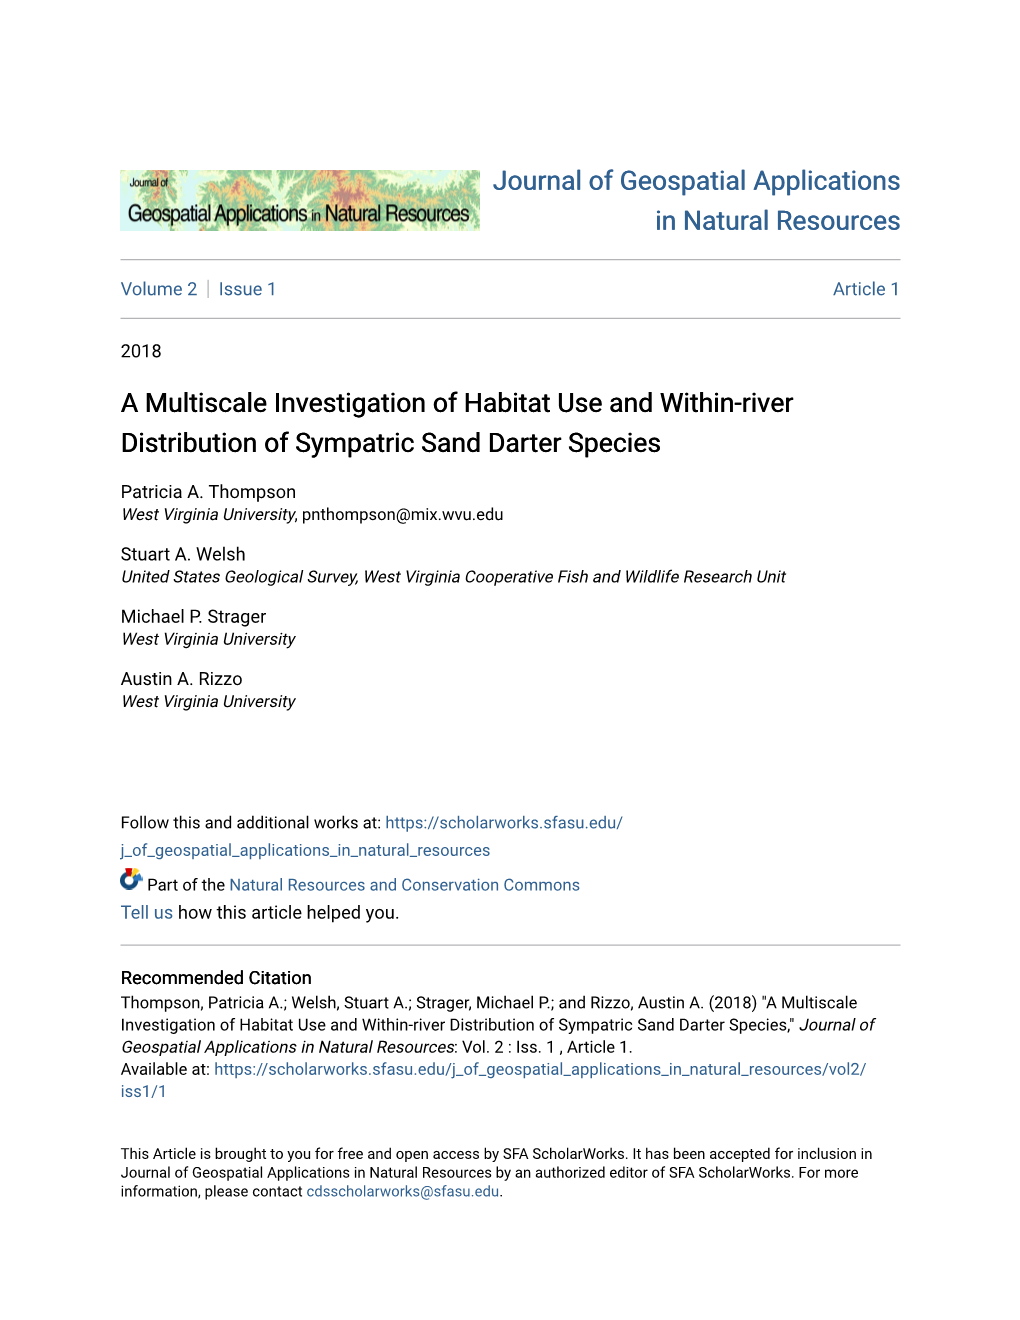 A Multiscale Investigation of Habitat Use and Within-River Distribution of Sympatric Sand Darter Species